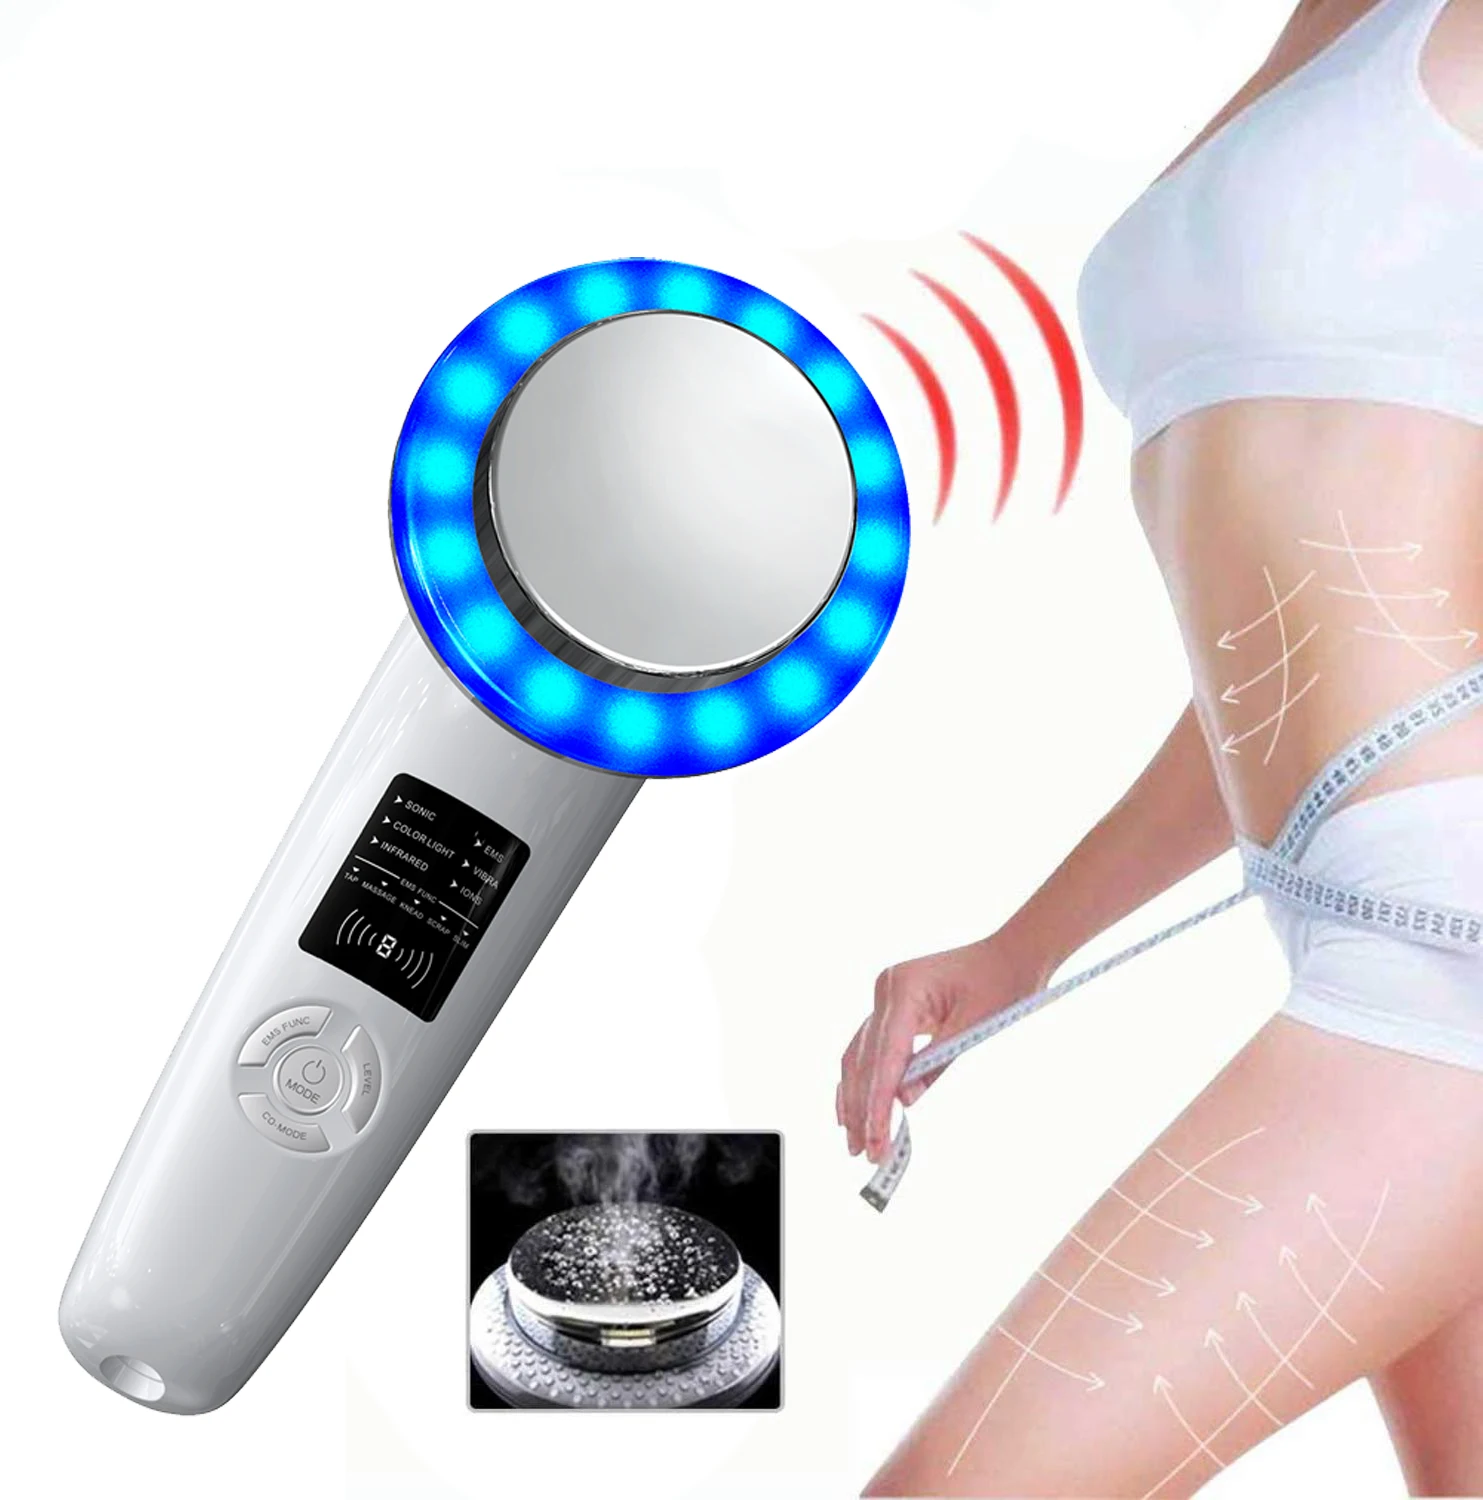 6 In 1 Ultrasonic Cavitation Machine EMS Galvanic LED Ultrasound Slimming Body Face Lift Tools Infrared Therapy Beauty Apparatus